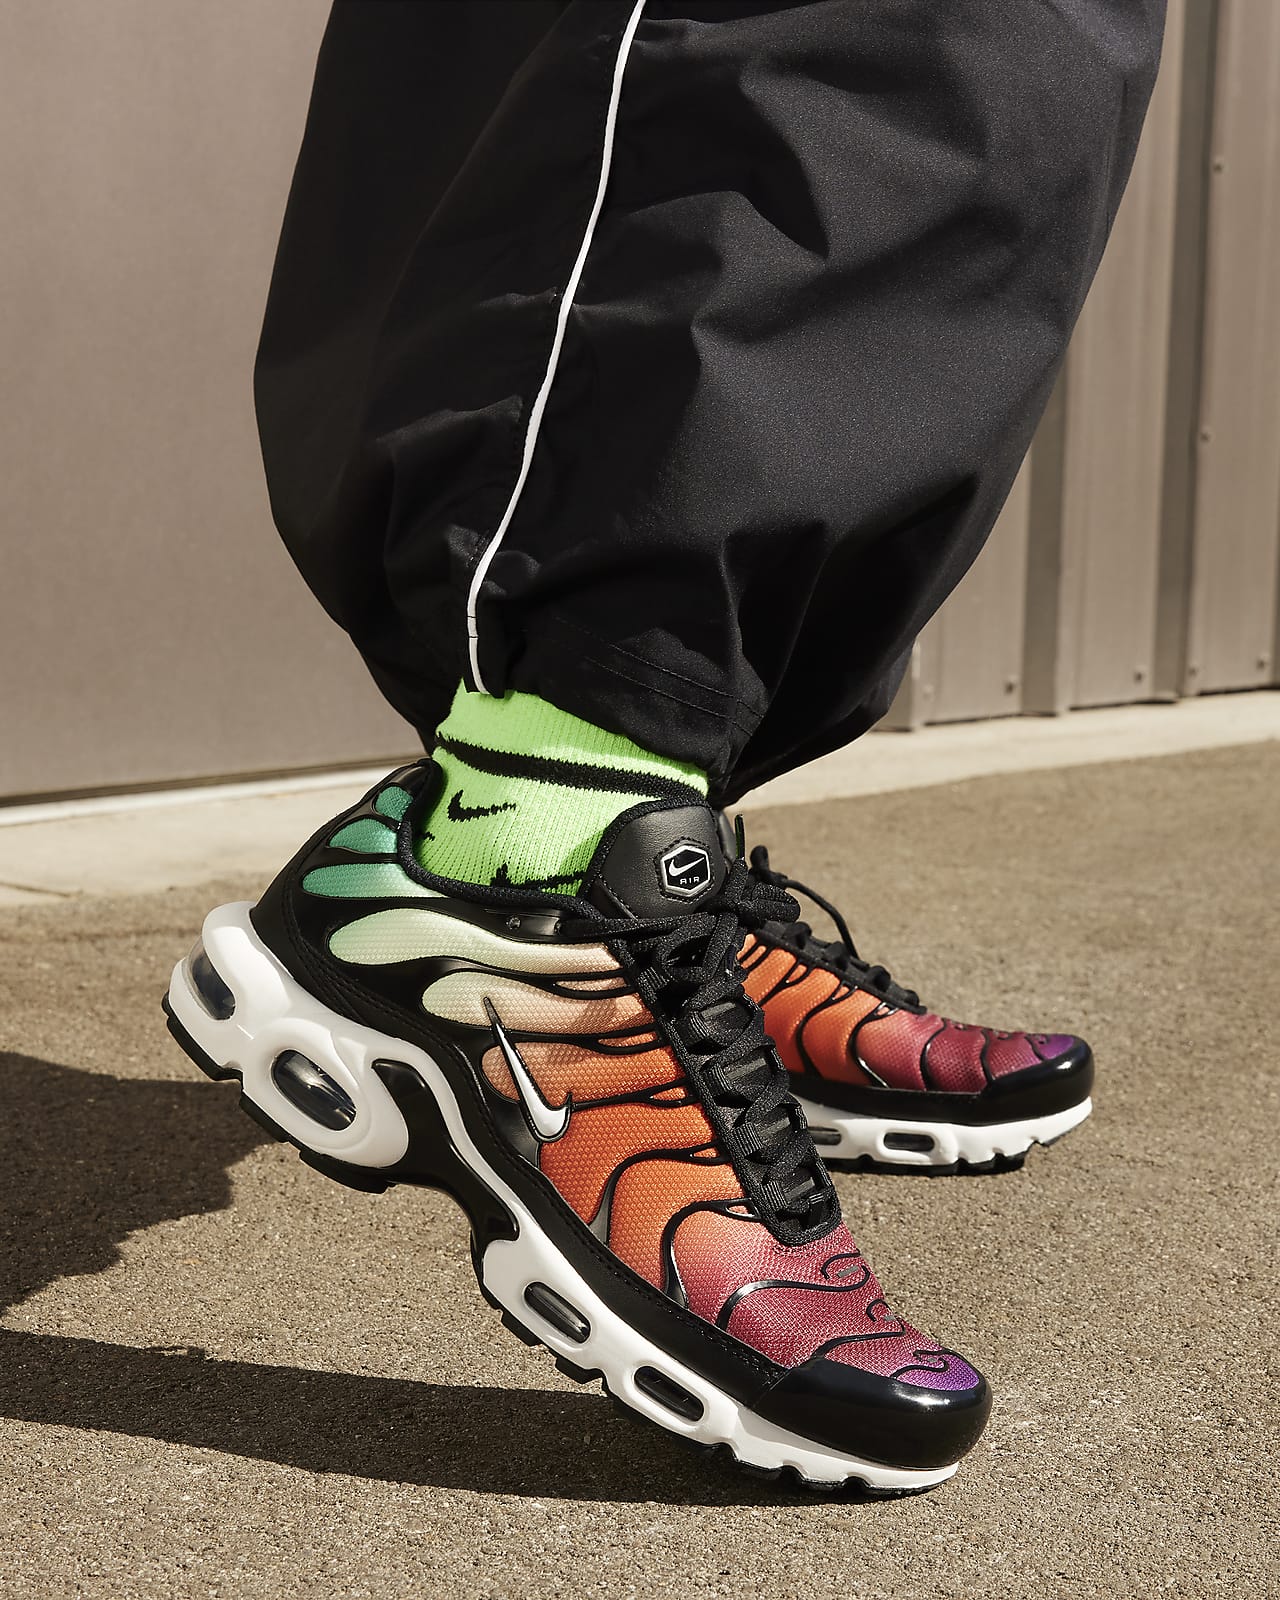 Buy Women's Nike Air Max Plus Shoes & New Sneakers - StockX